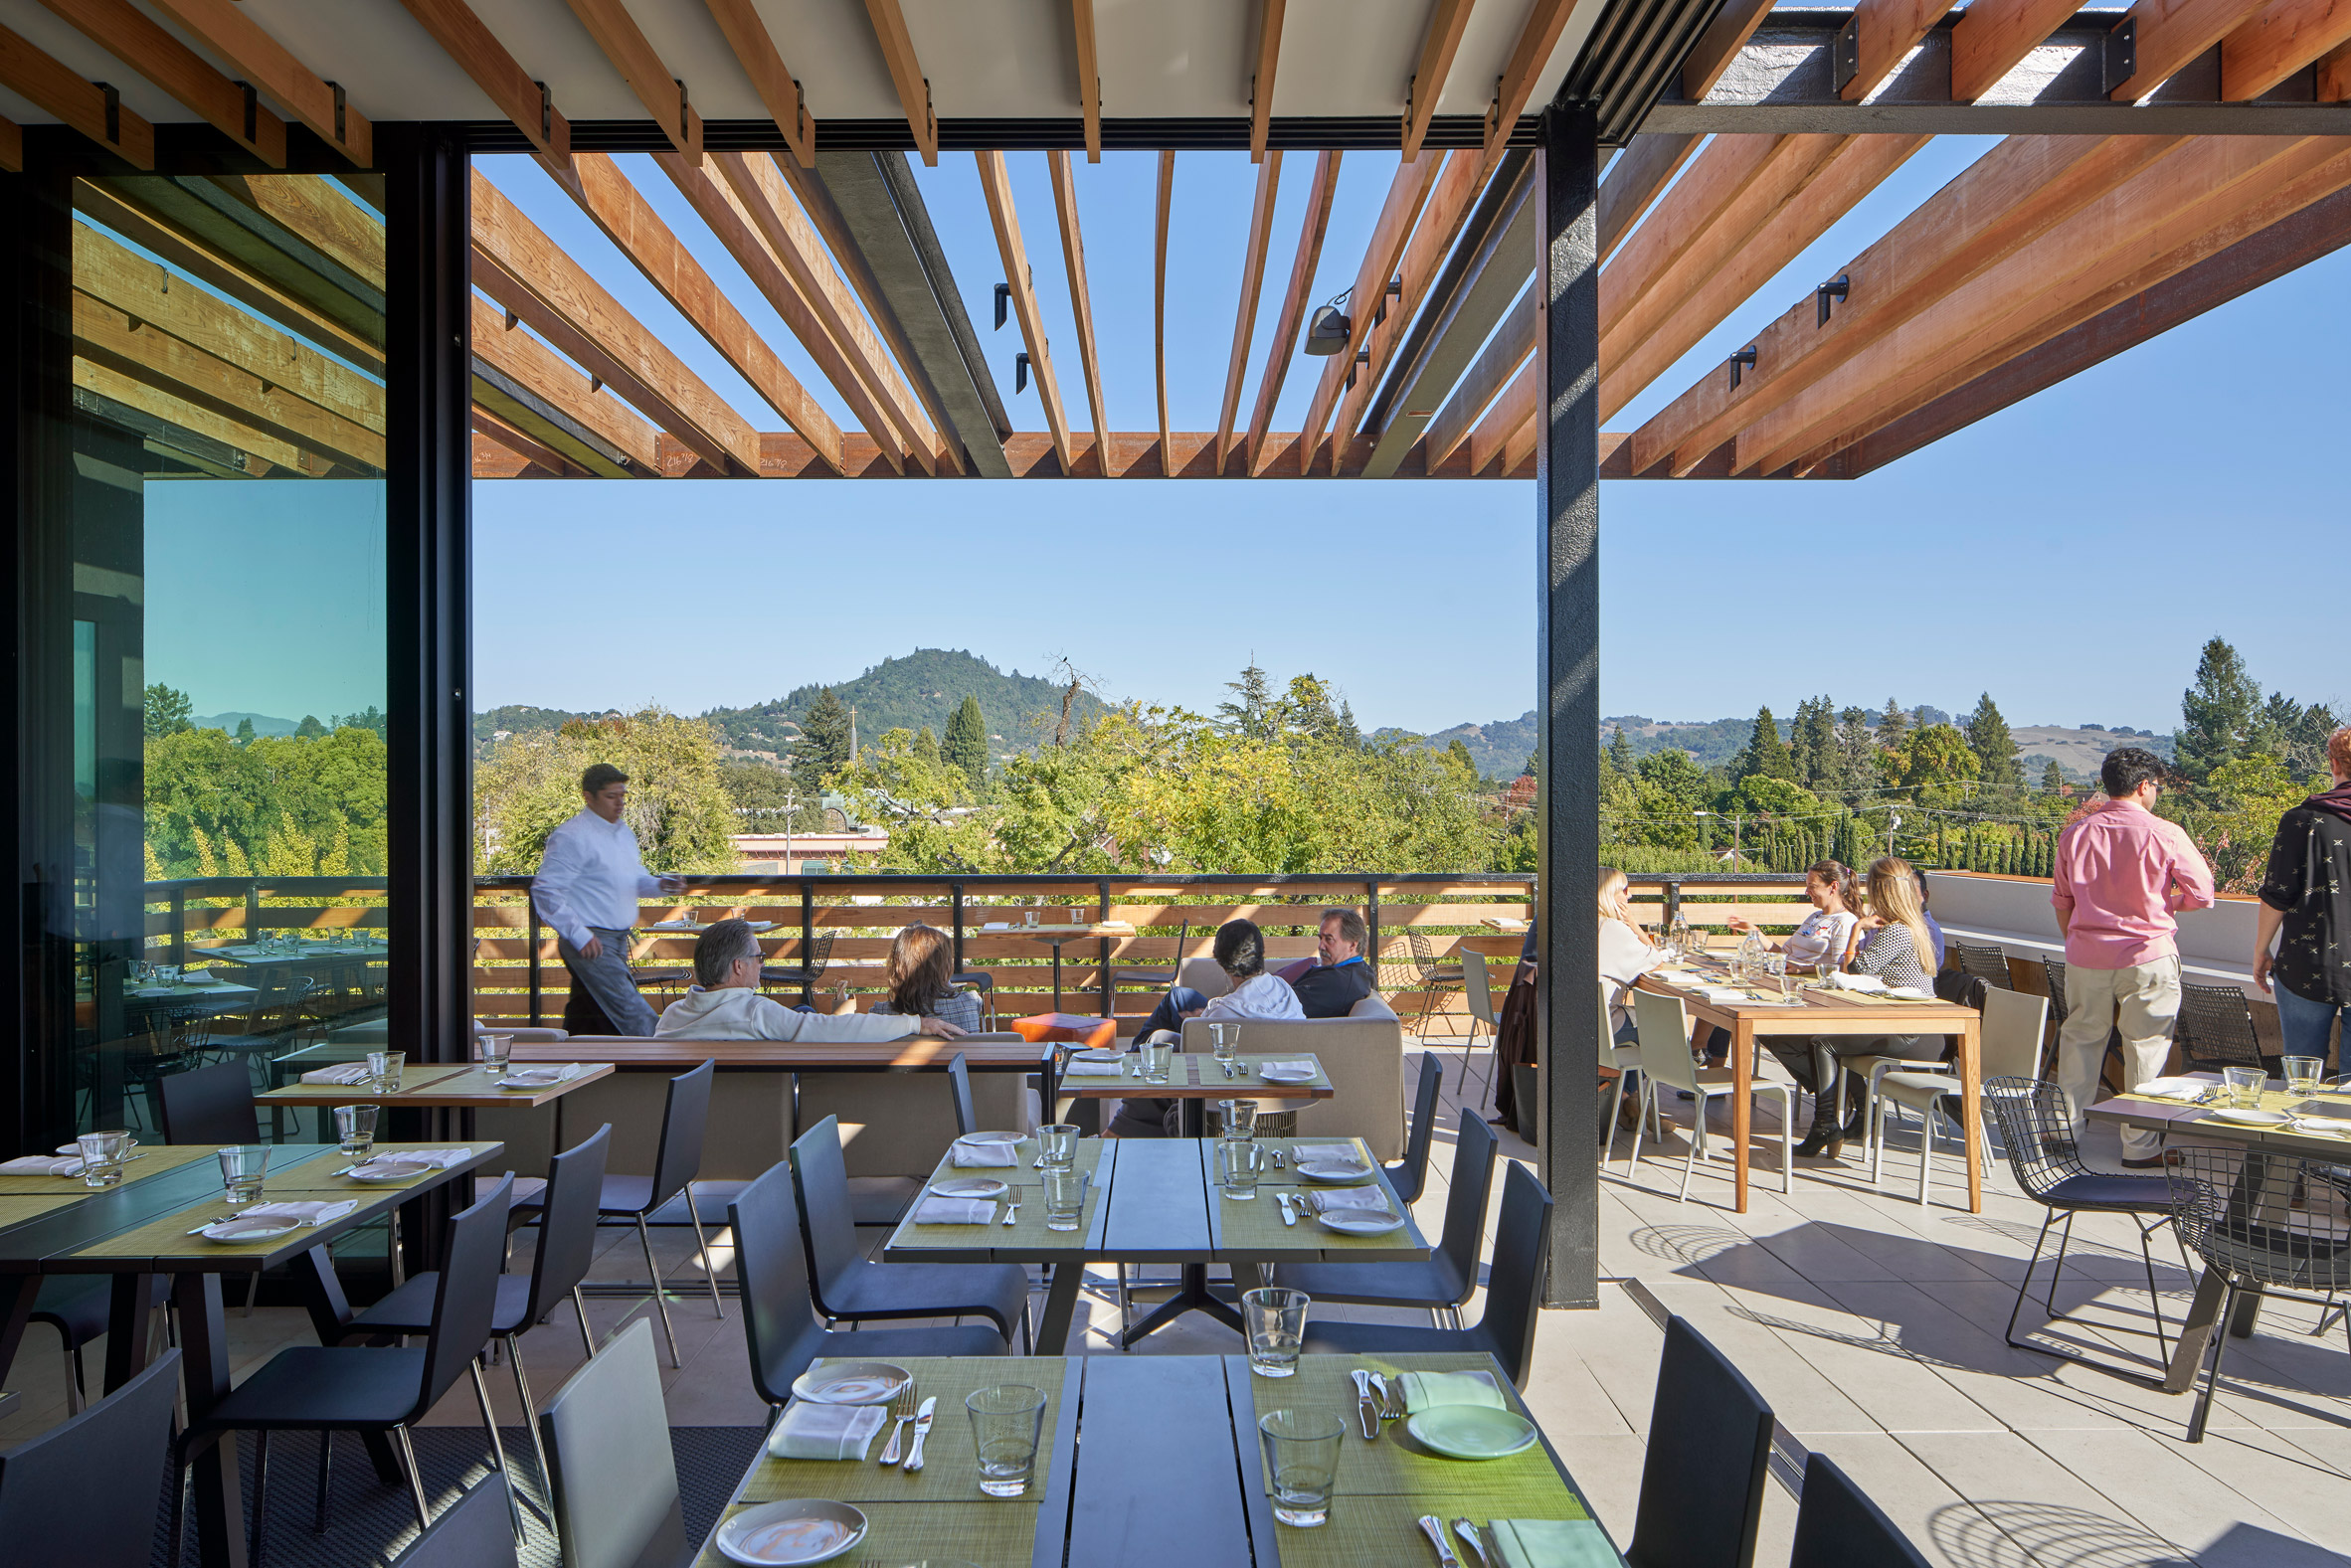 Harmon Guest House in Sonoma, California by David Baker Architects